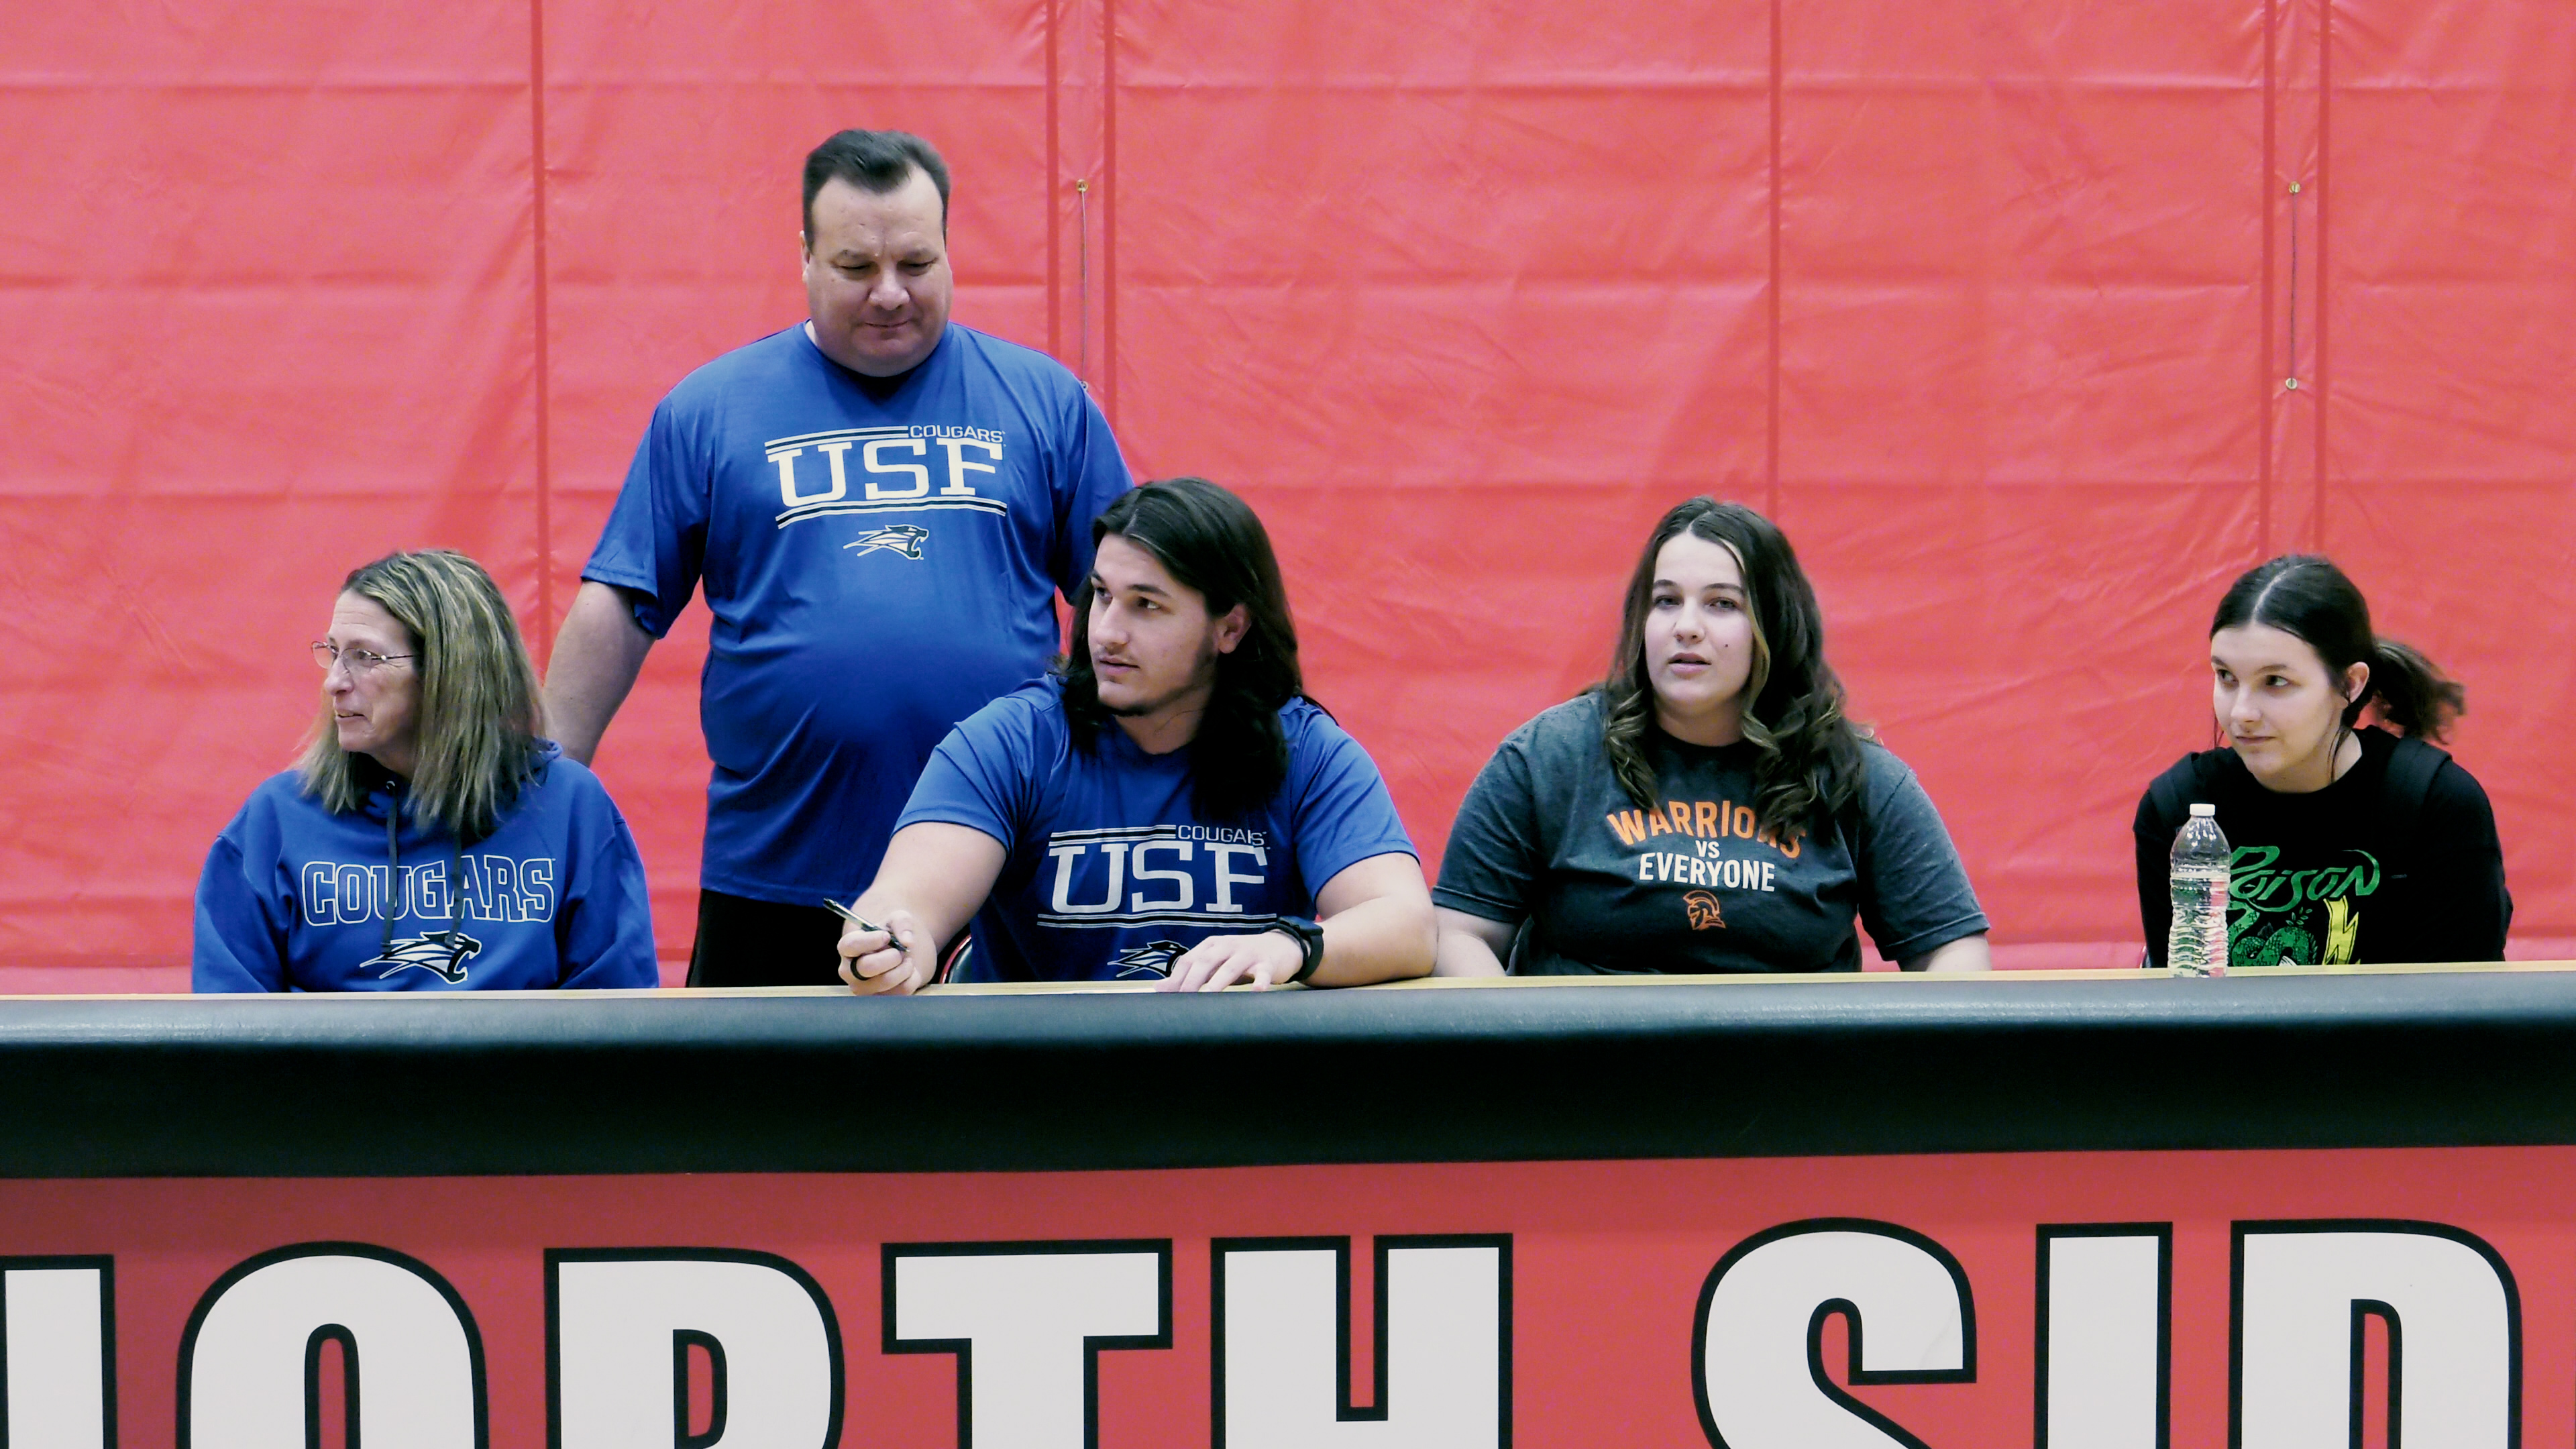 North Side's Vargovich joins USF football